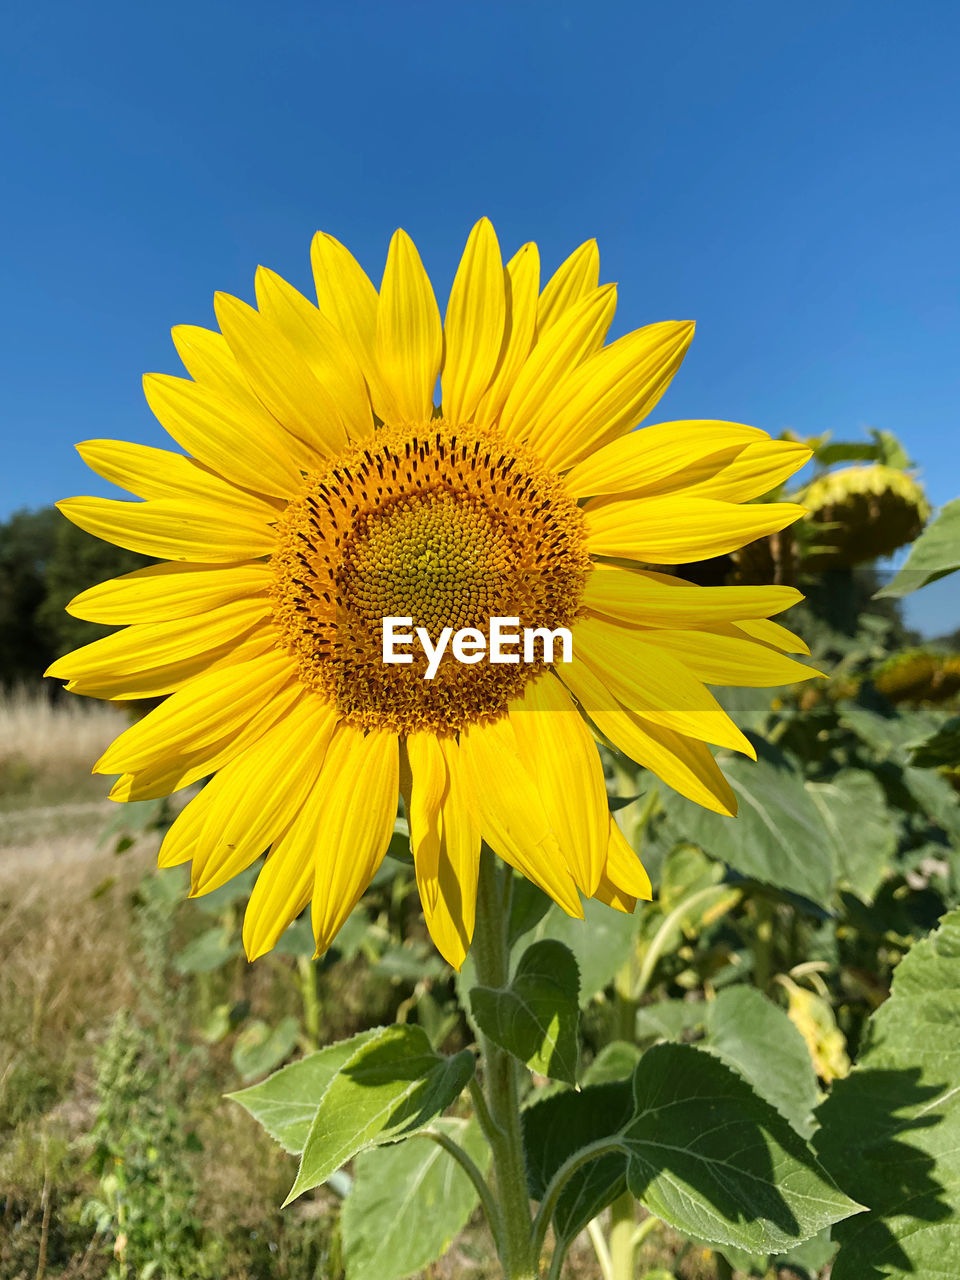 plant, flower, flowering plant, yellow, freshness, sunflower, beauty in nature, flower head, growth, sky, nature, landscape, field, inflorescence, rural scene, petal, land, fragility, agriculture, clear sky, close-up, blue, no people, leaf, plant part, summer, environment, crop, sunlight, botany, springtime, sunny, farm, vibrant color, outdoors, pollen, scenics - nature, day, blossom, focus on foreground, cloud, horizon over land, tranquility, seed, asterales, wildflower, horizon, sunflower seed, non-urban scene, idyllic, landscaped, copy space